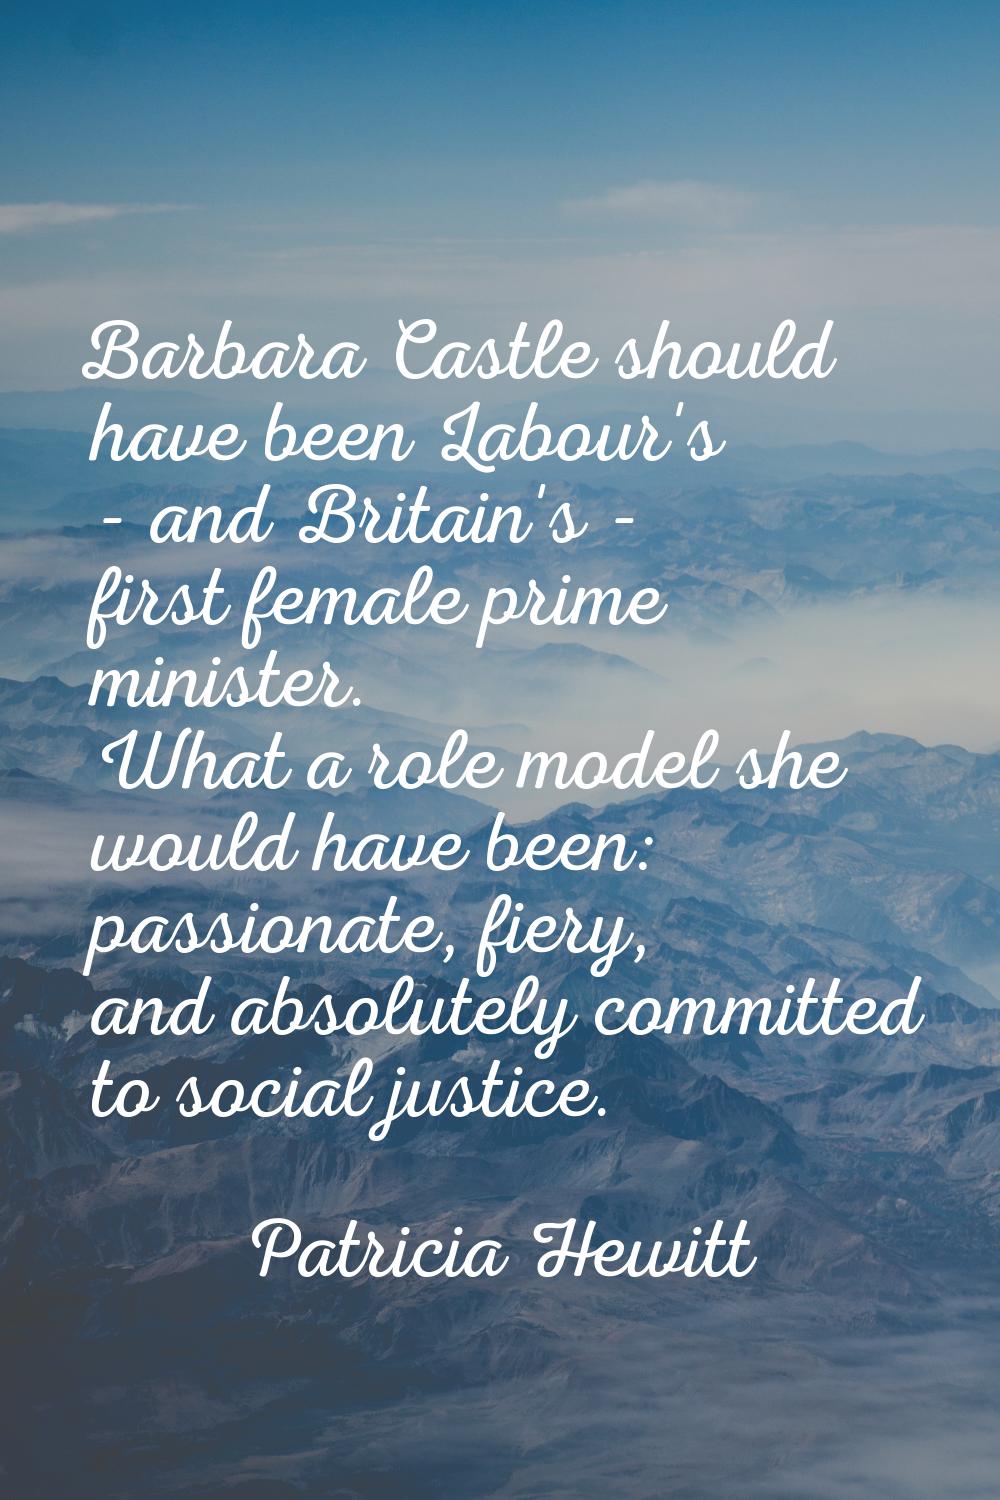 Barbara Castle should have been Labour's - and Britain's - first female prime minister. What a role